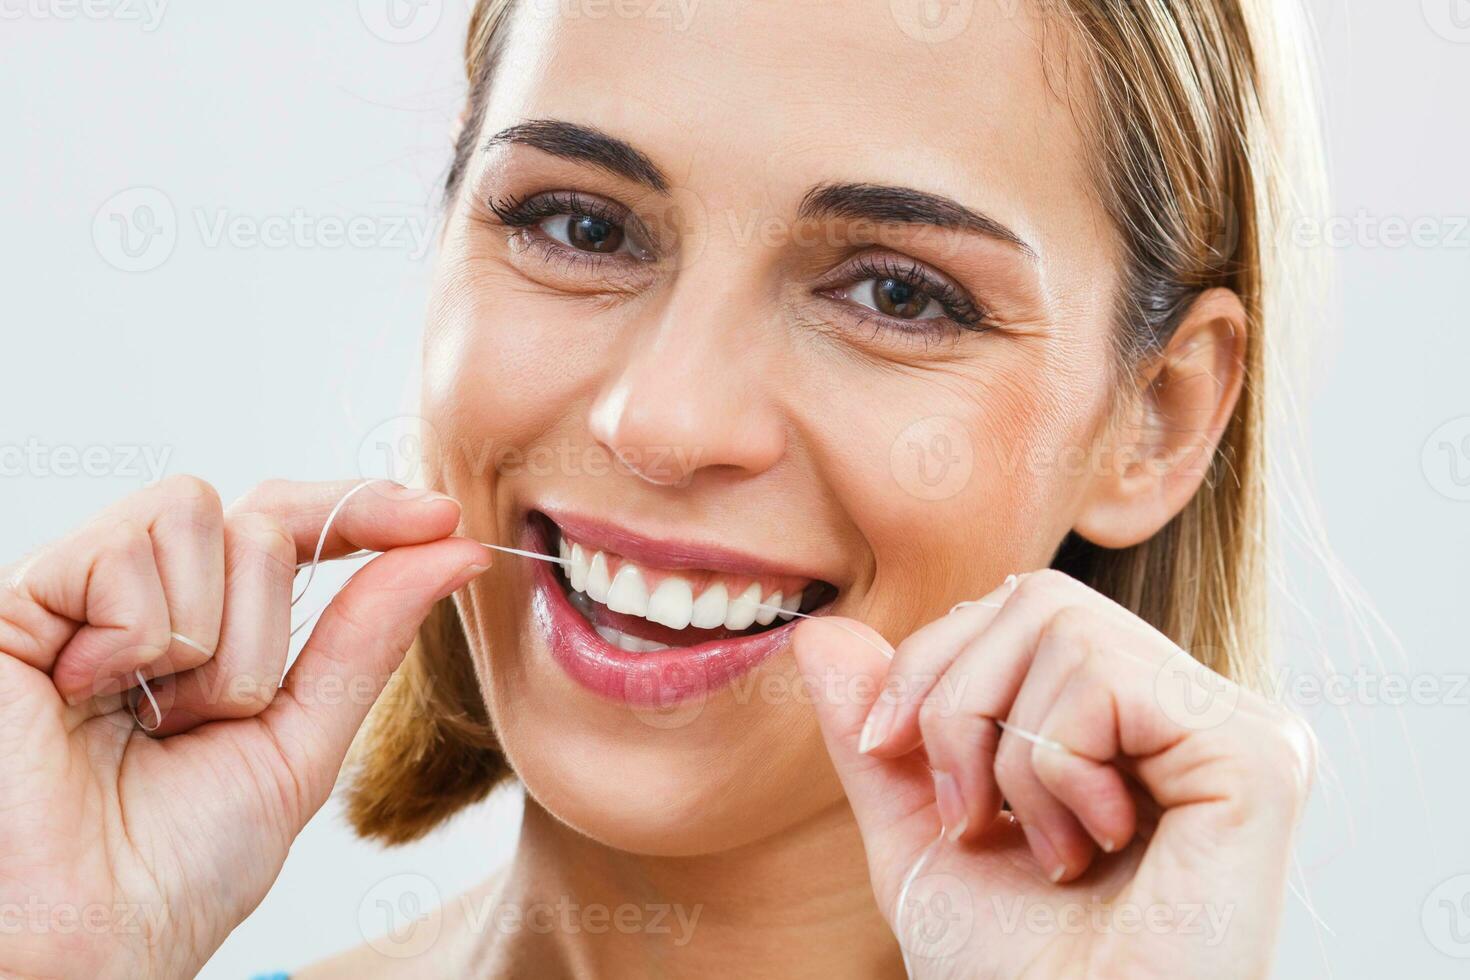 Woman cleaning teeth with dental floss photo